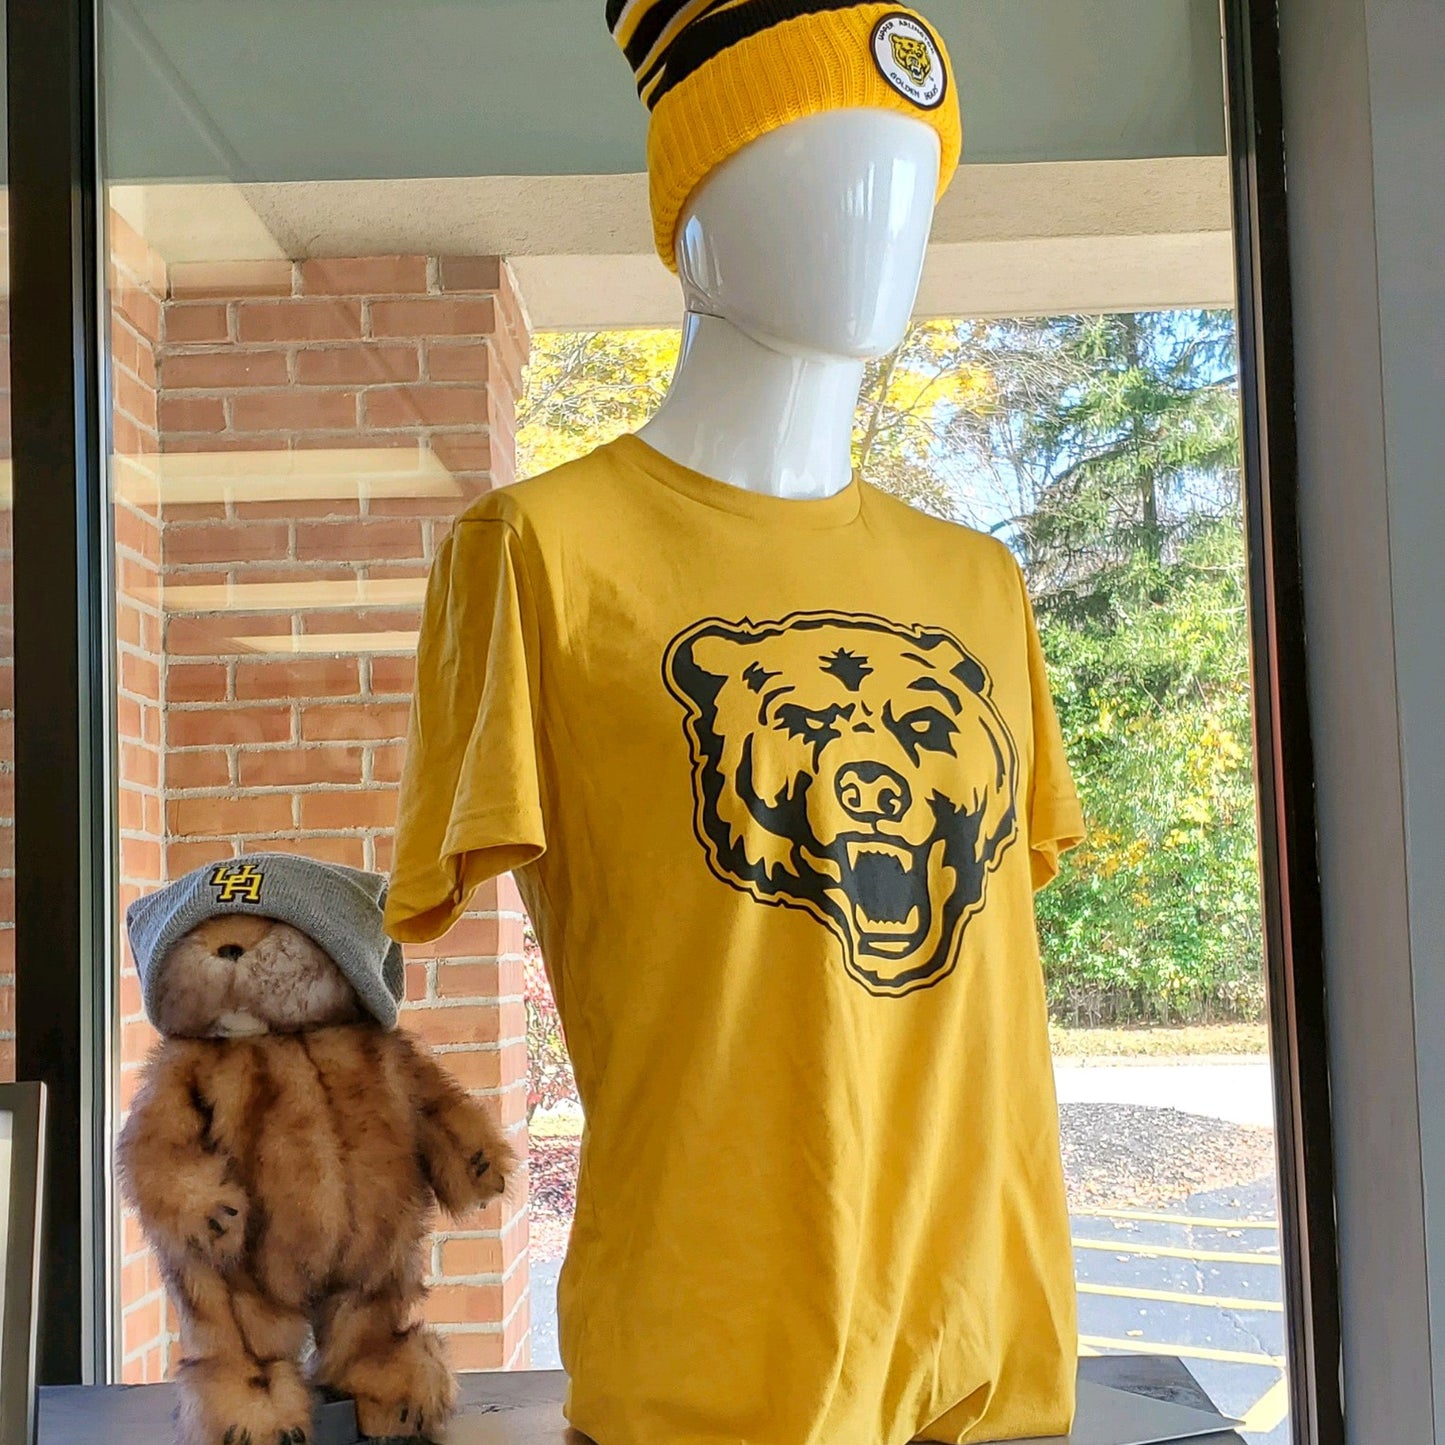 Show off your Upper Arlington Golden Bear Pride with this classic edition t-shirt. The officially licensed Golden Bear logo printed in black on a mustard t-shirt. Shown on a mannequin in The Shop. 